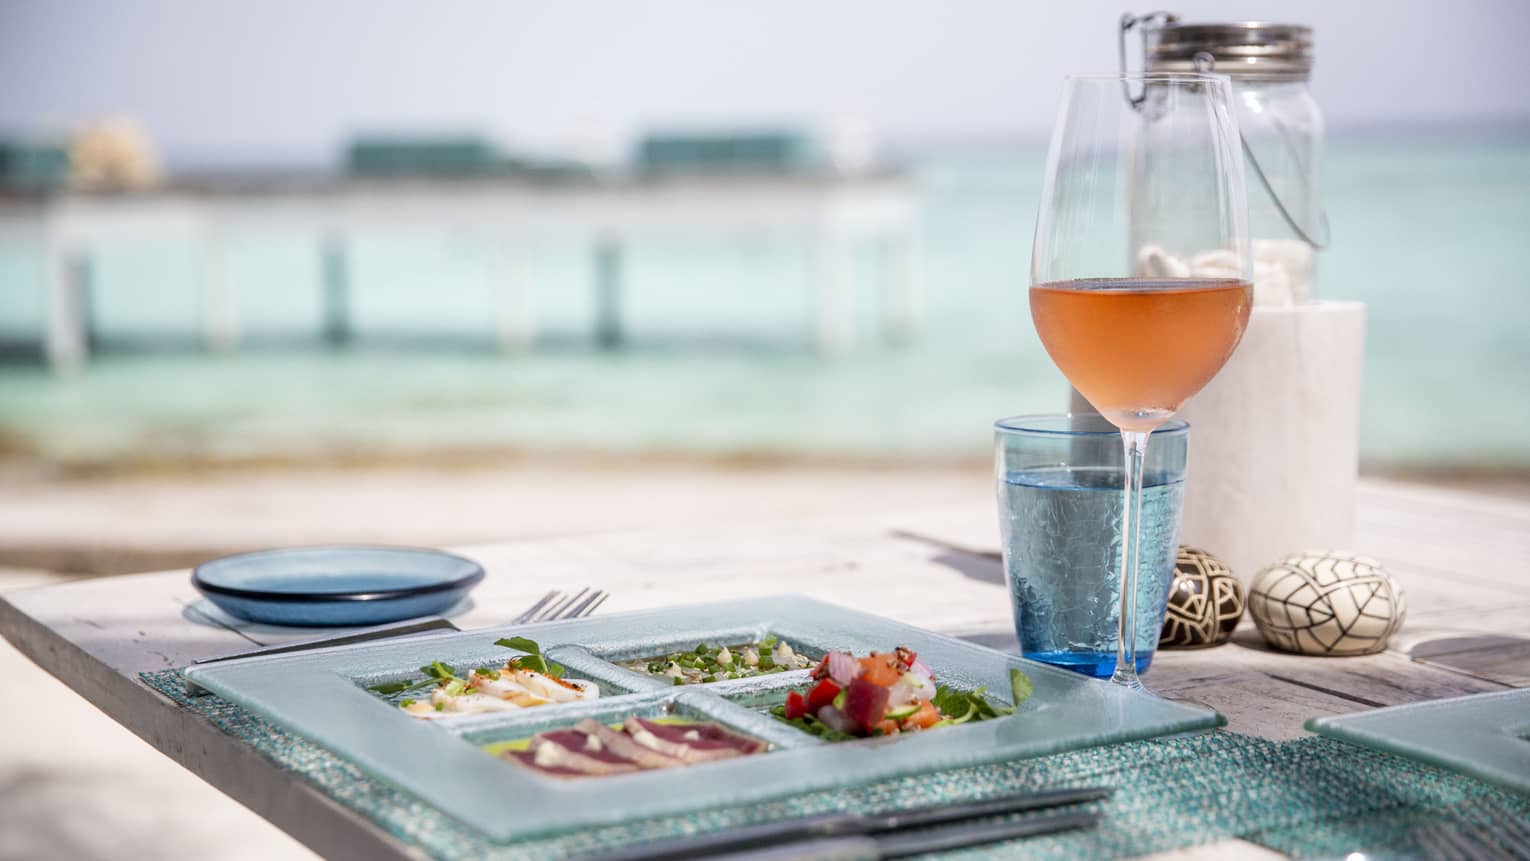 Outdoor dining table with glass plate with sashimi, wine overlooking lagoon